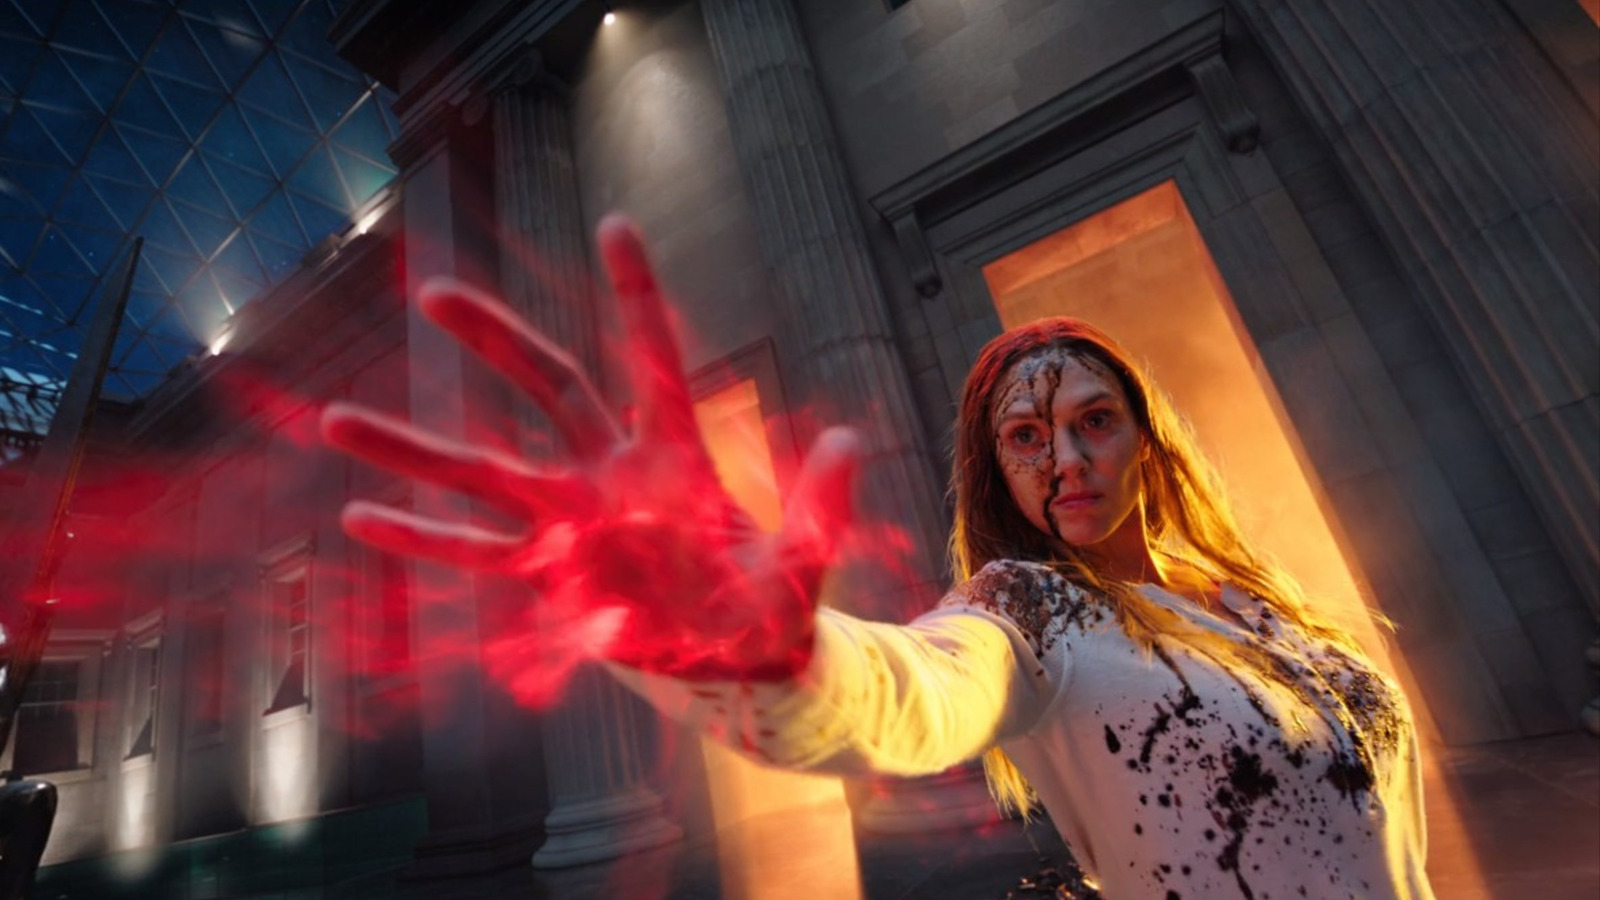 An early version of Doctor Strange in the Multiverse of Madness didn't make the Scarlet Witch a villain right away